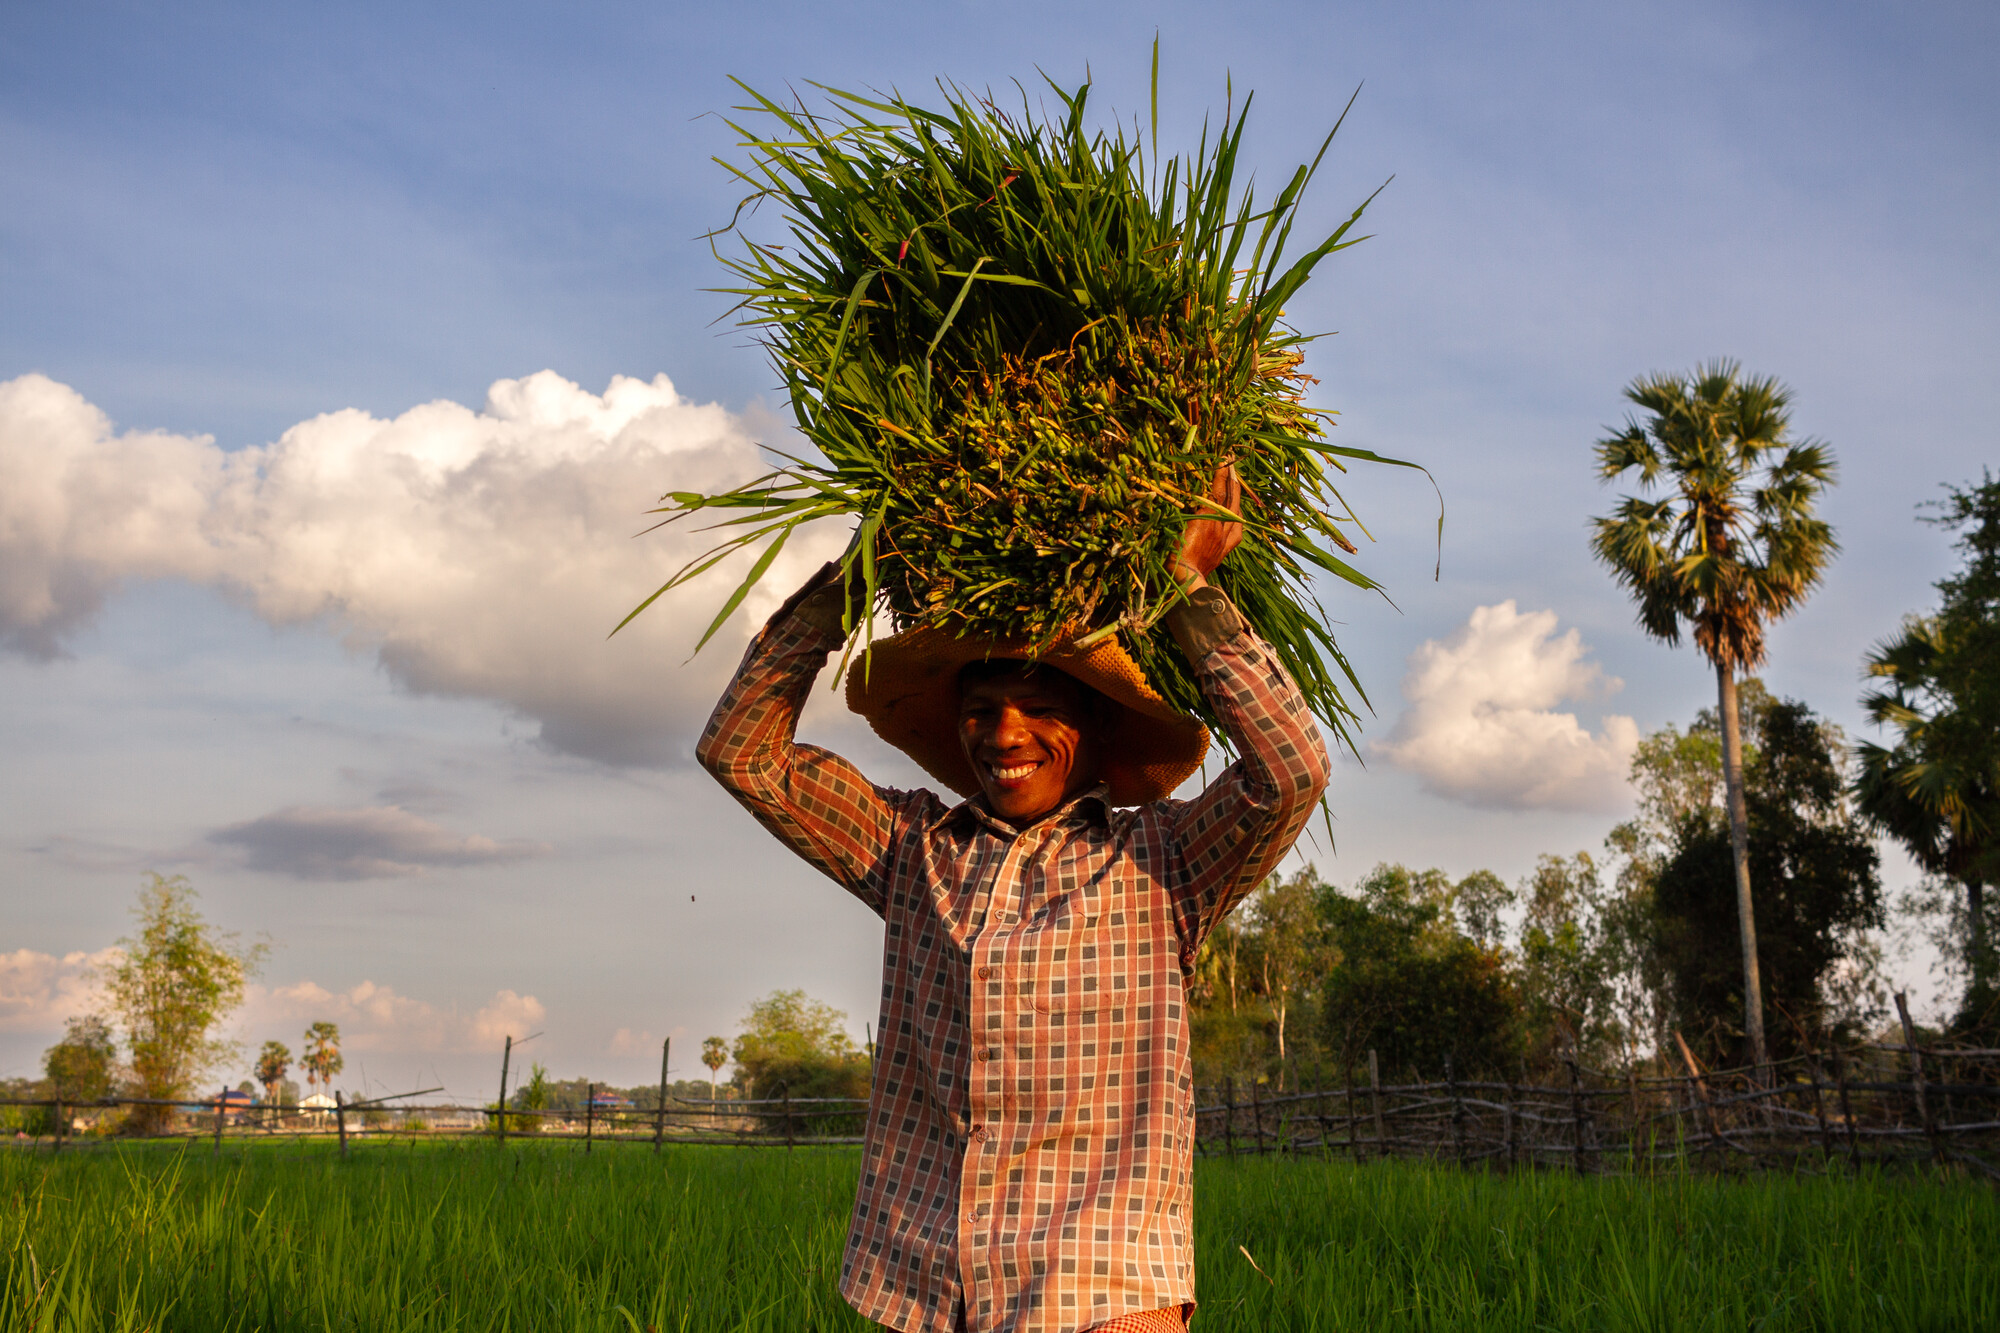 A man in Cambodia carrying a large bundle of grass on his head